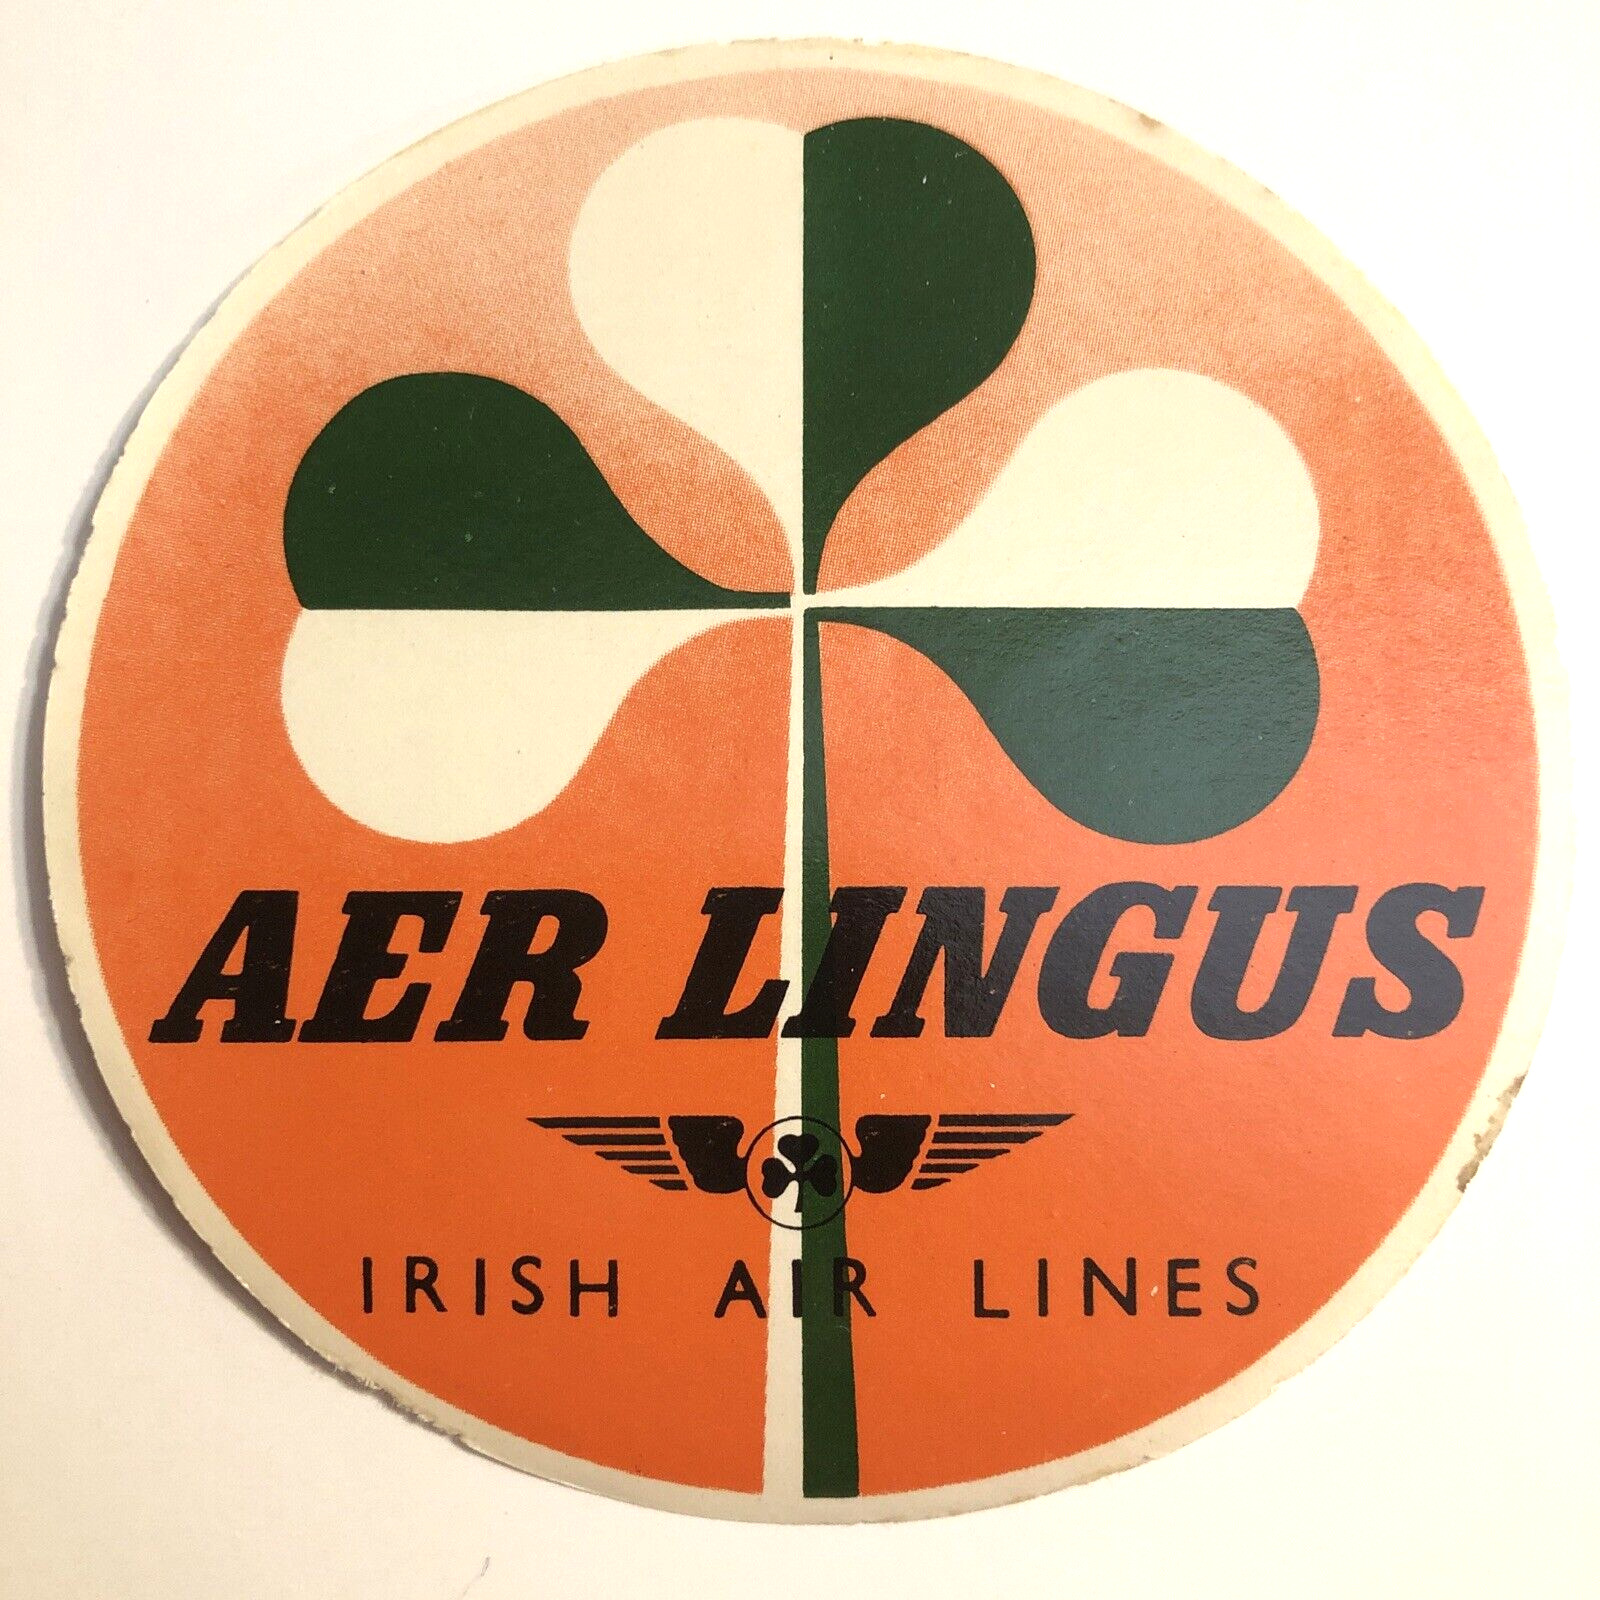 AER LINGUS IRISH AIRLINES NOS Vtg Airline Luggage Label Decal Tag 